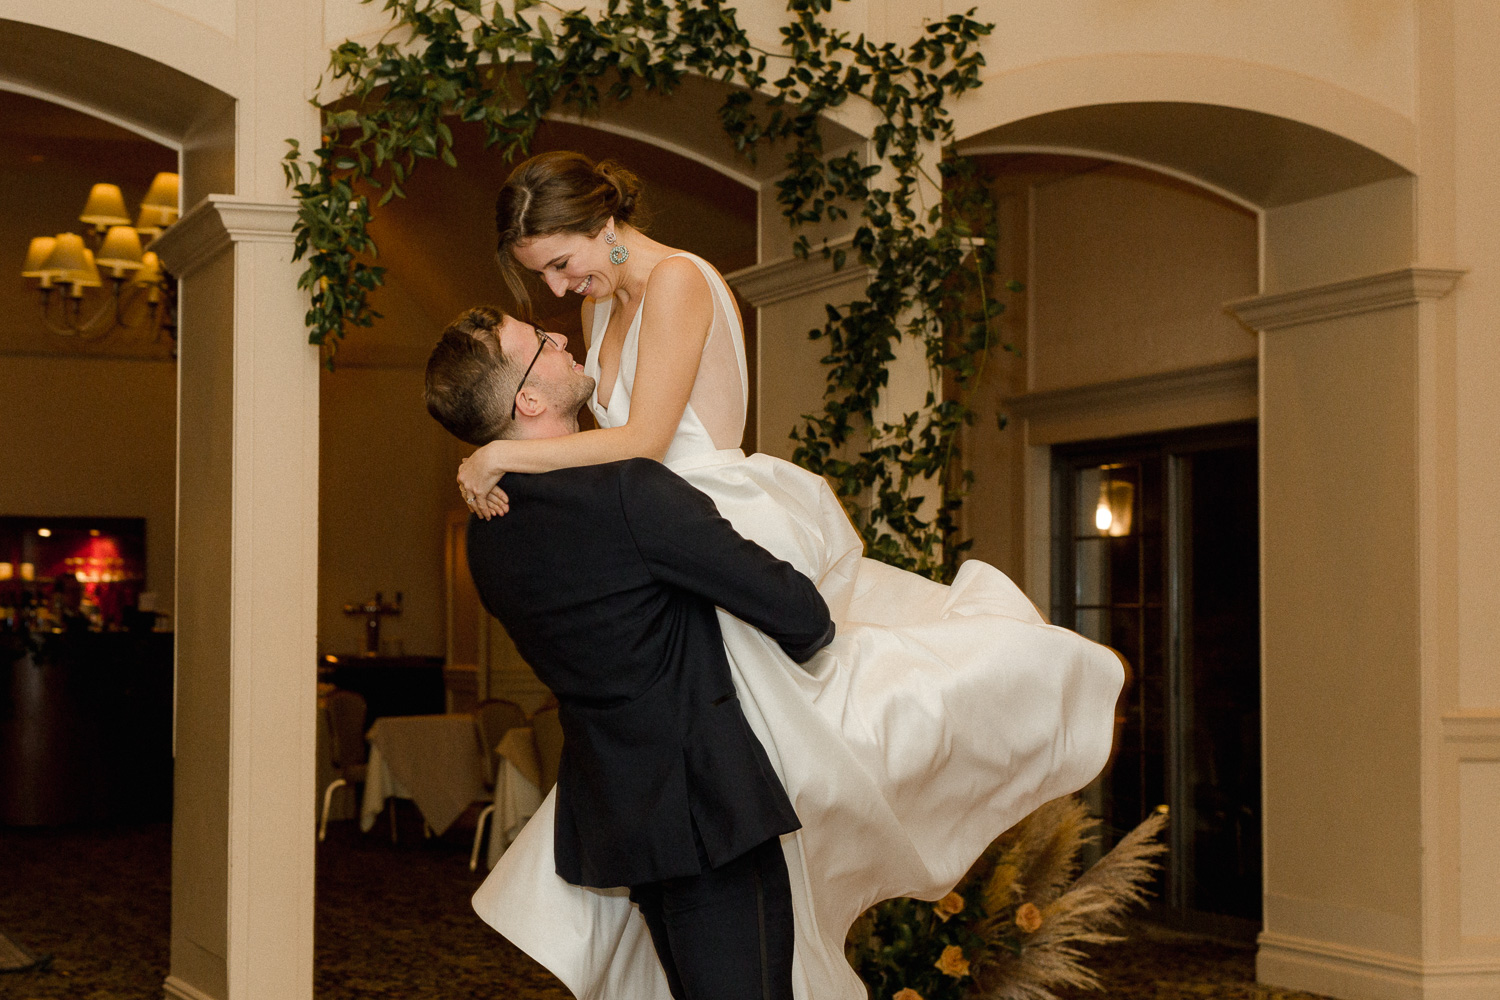 bride-and-groom-first-dance